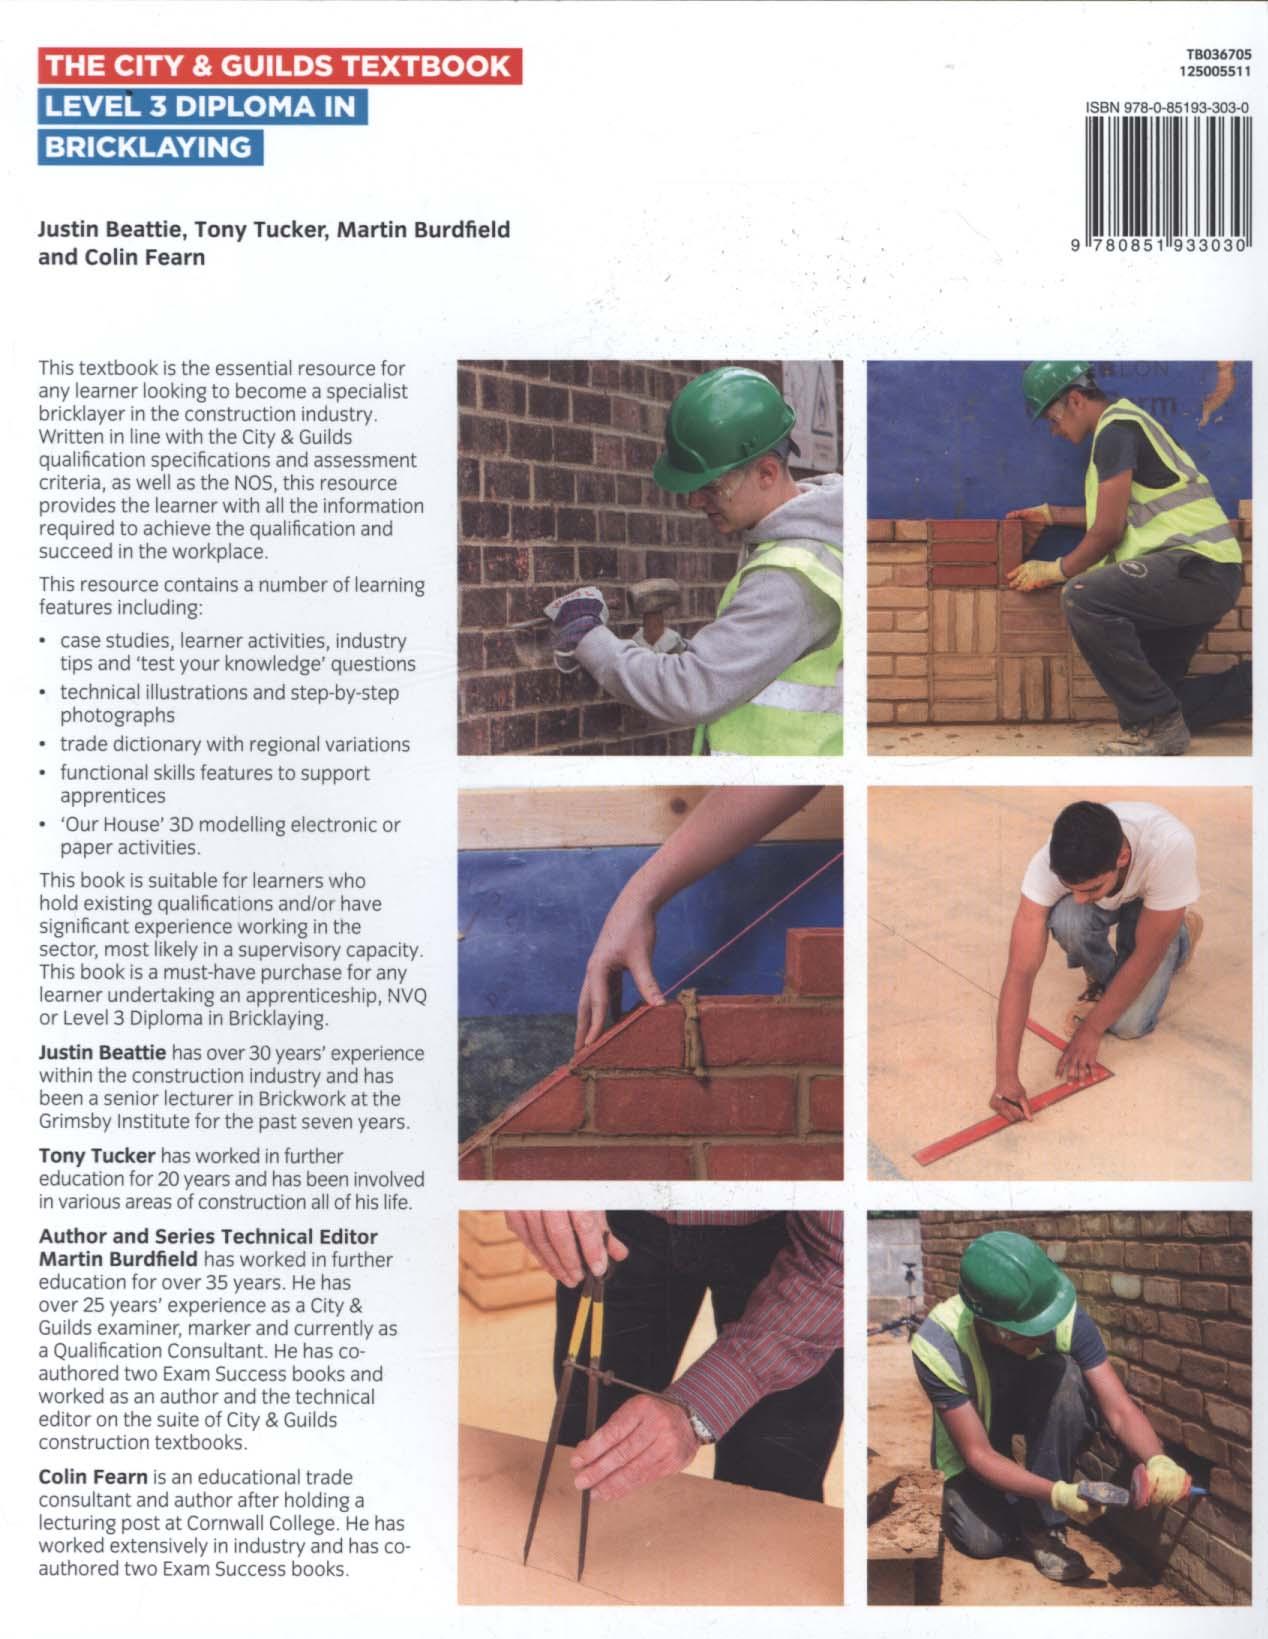 City & Guilds Textbook: Level 3 Diploma in Bricklaying